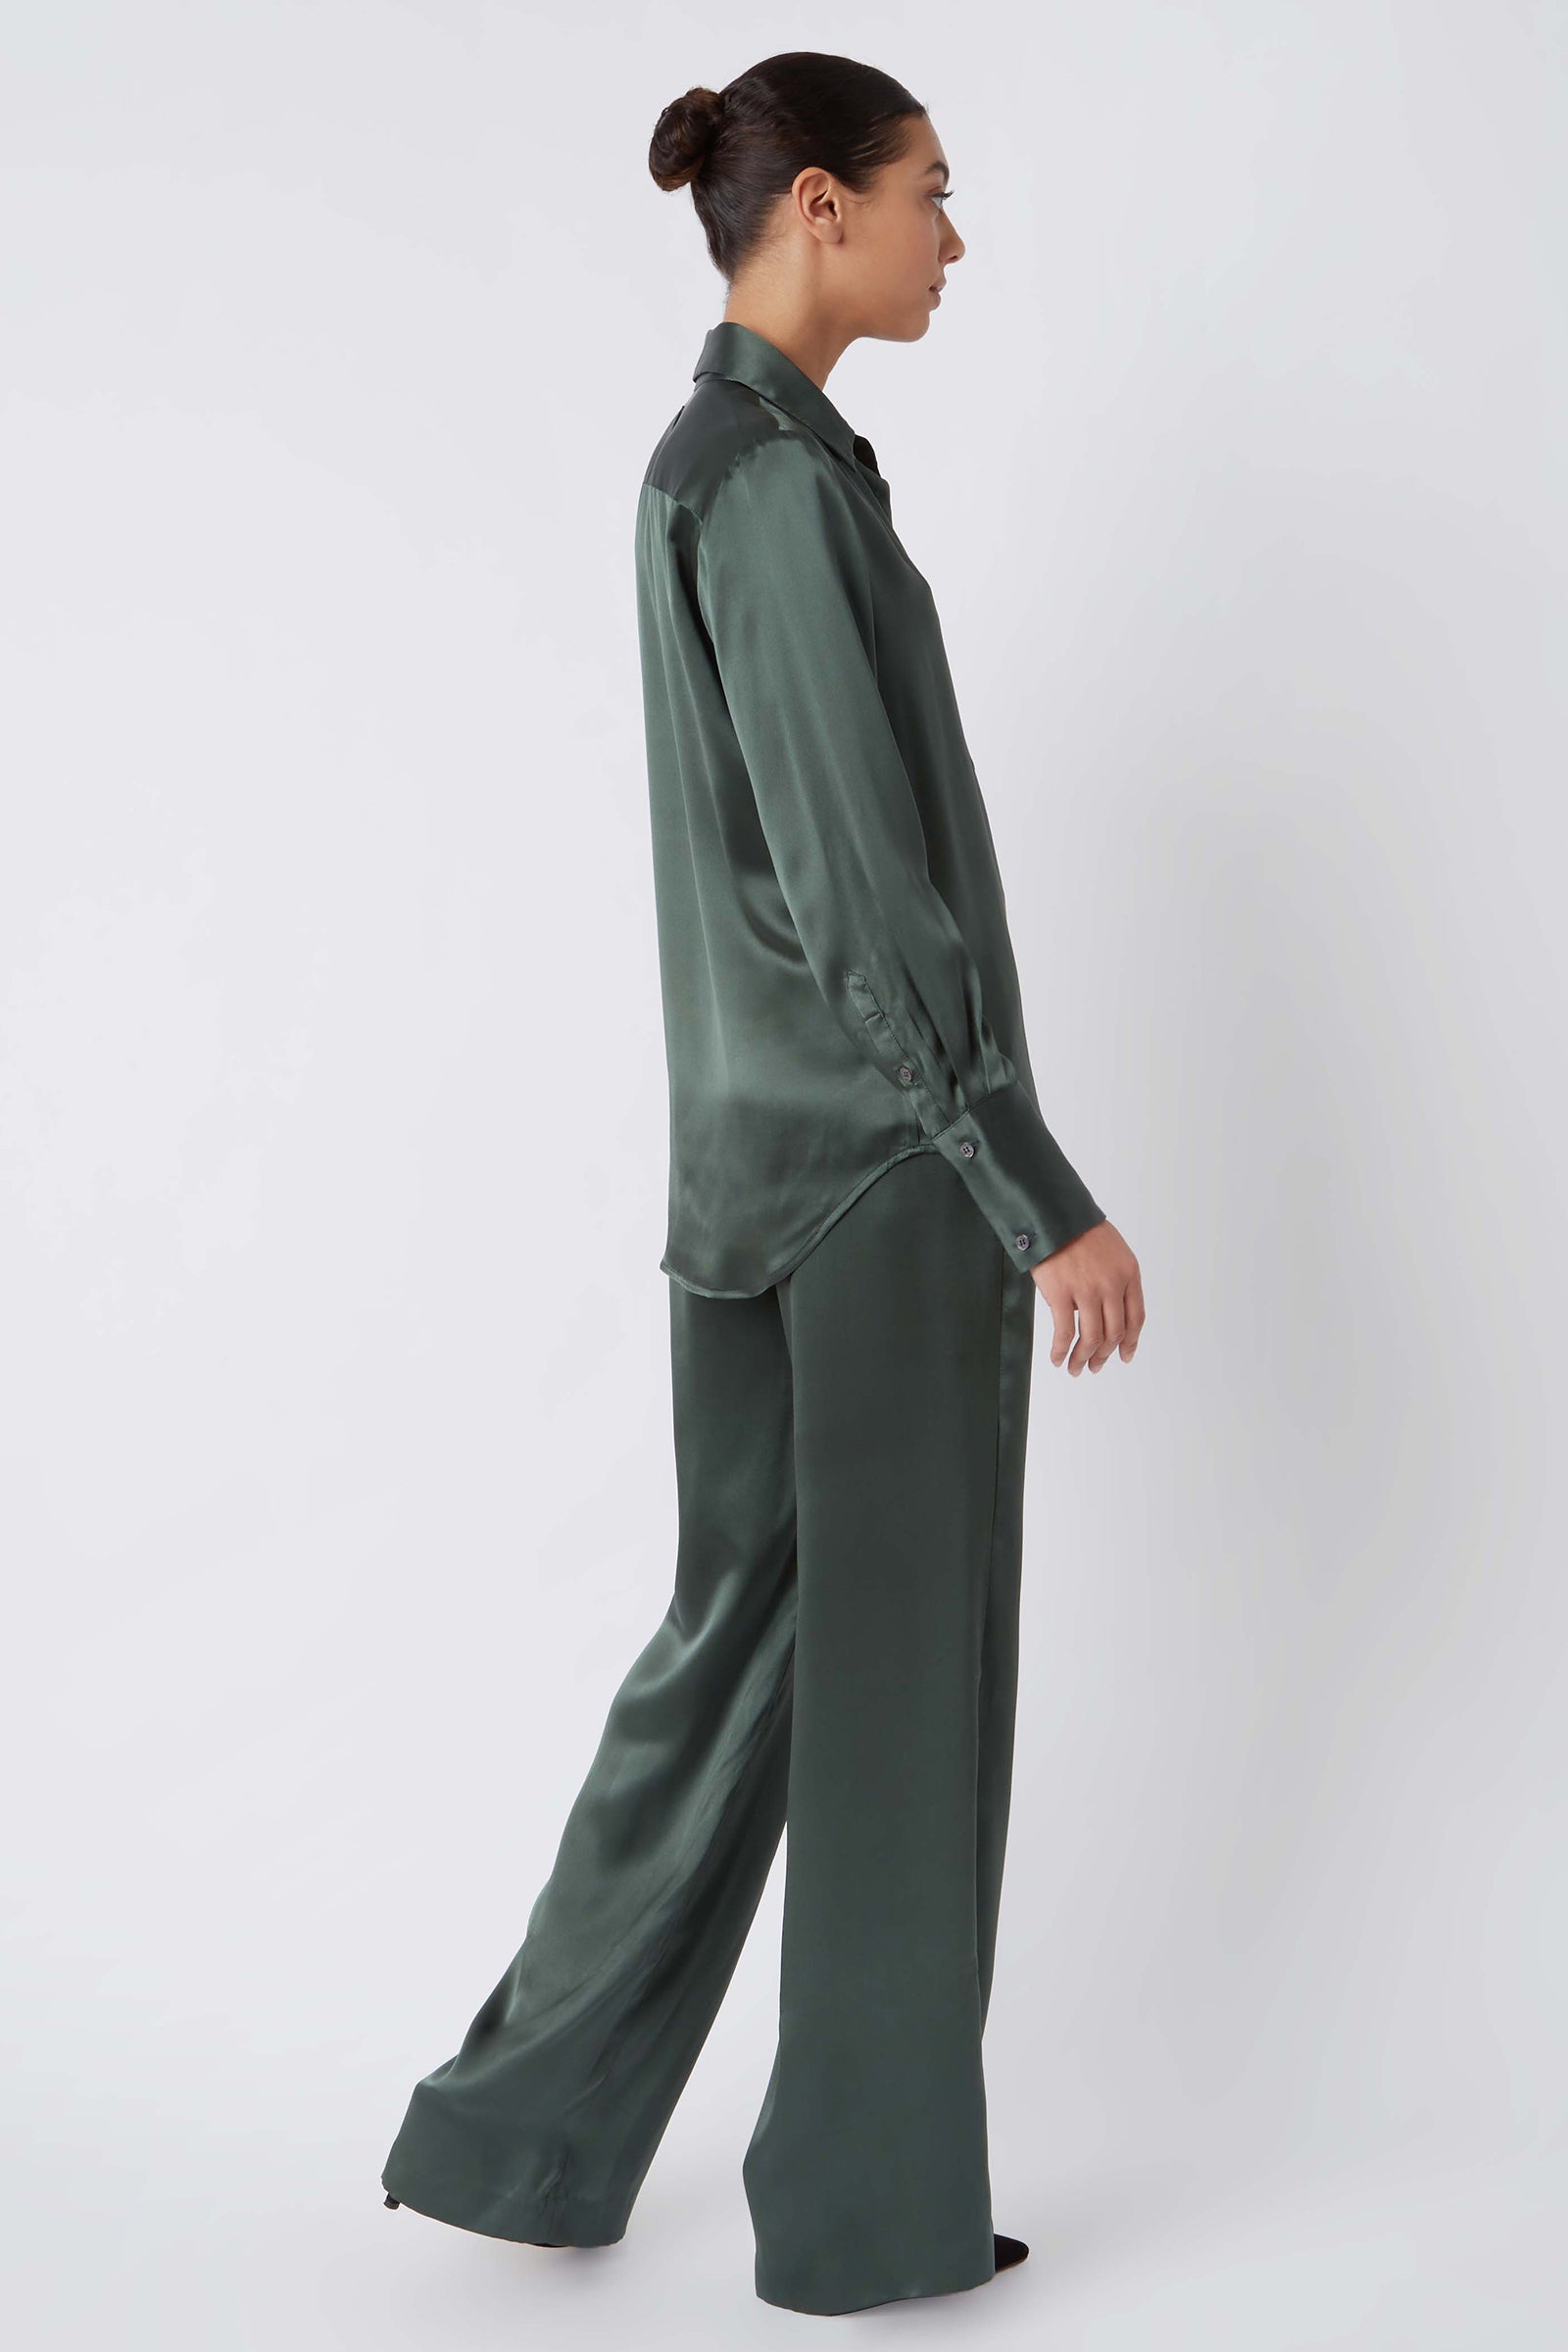 Kal Rieman Classic Tailored Blouse in Loden on Model Full Side View